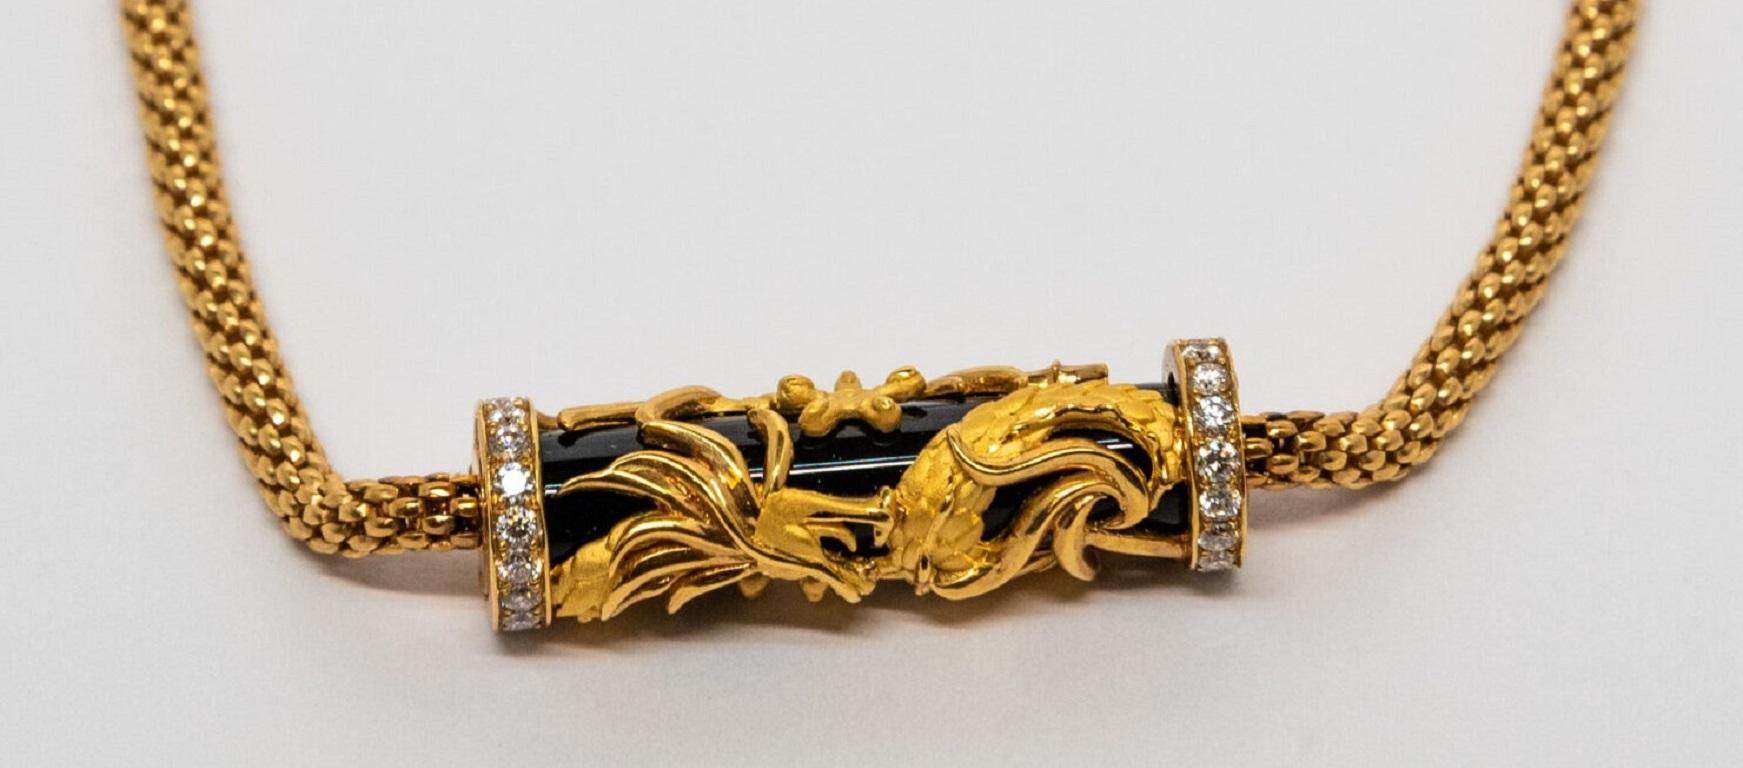 10071995 Carrera Y Carrera
18K Yellow Gold slider adjustable bracelet. 18K Yellow Gold chain with a bolo clasp. This piece is set with a tube-shaped middle part decorated with a yellow gold dragon figure placed on Black Onyx. The sides are decorated